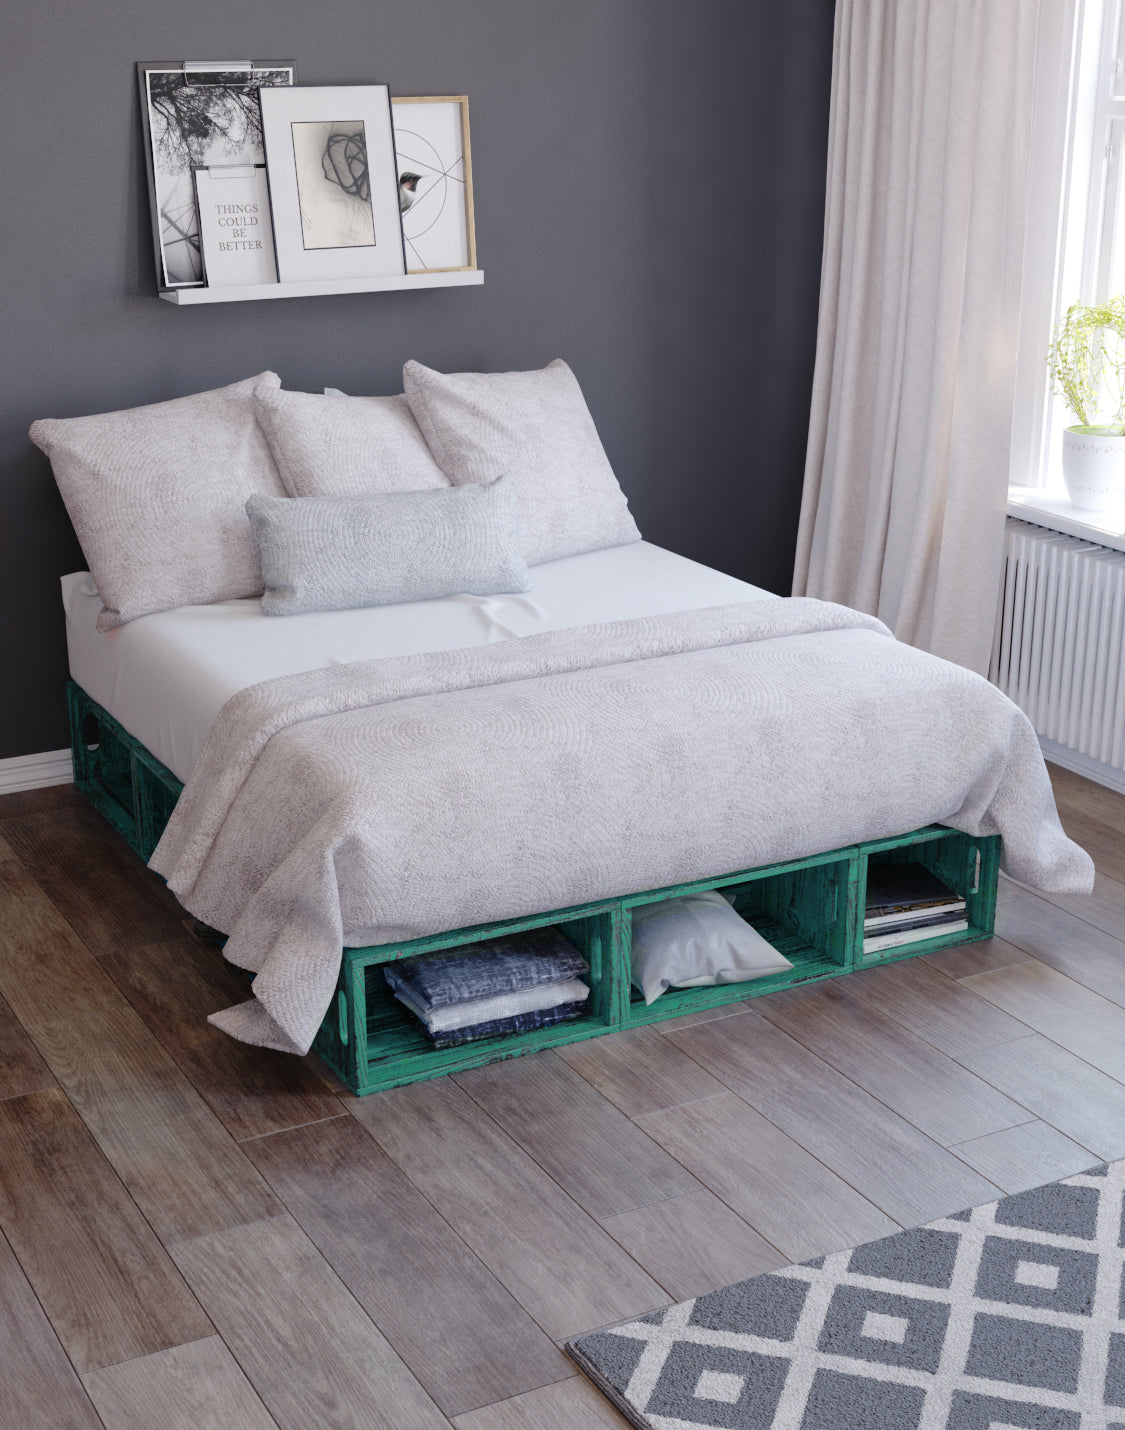 ANDRE Bed Modular And real wood furniture product